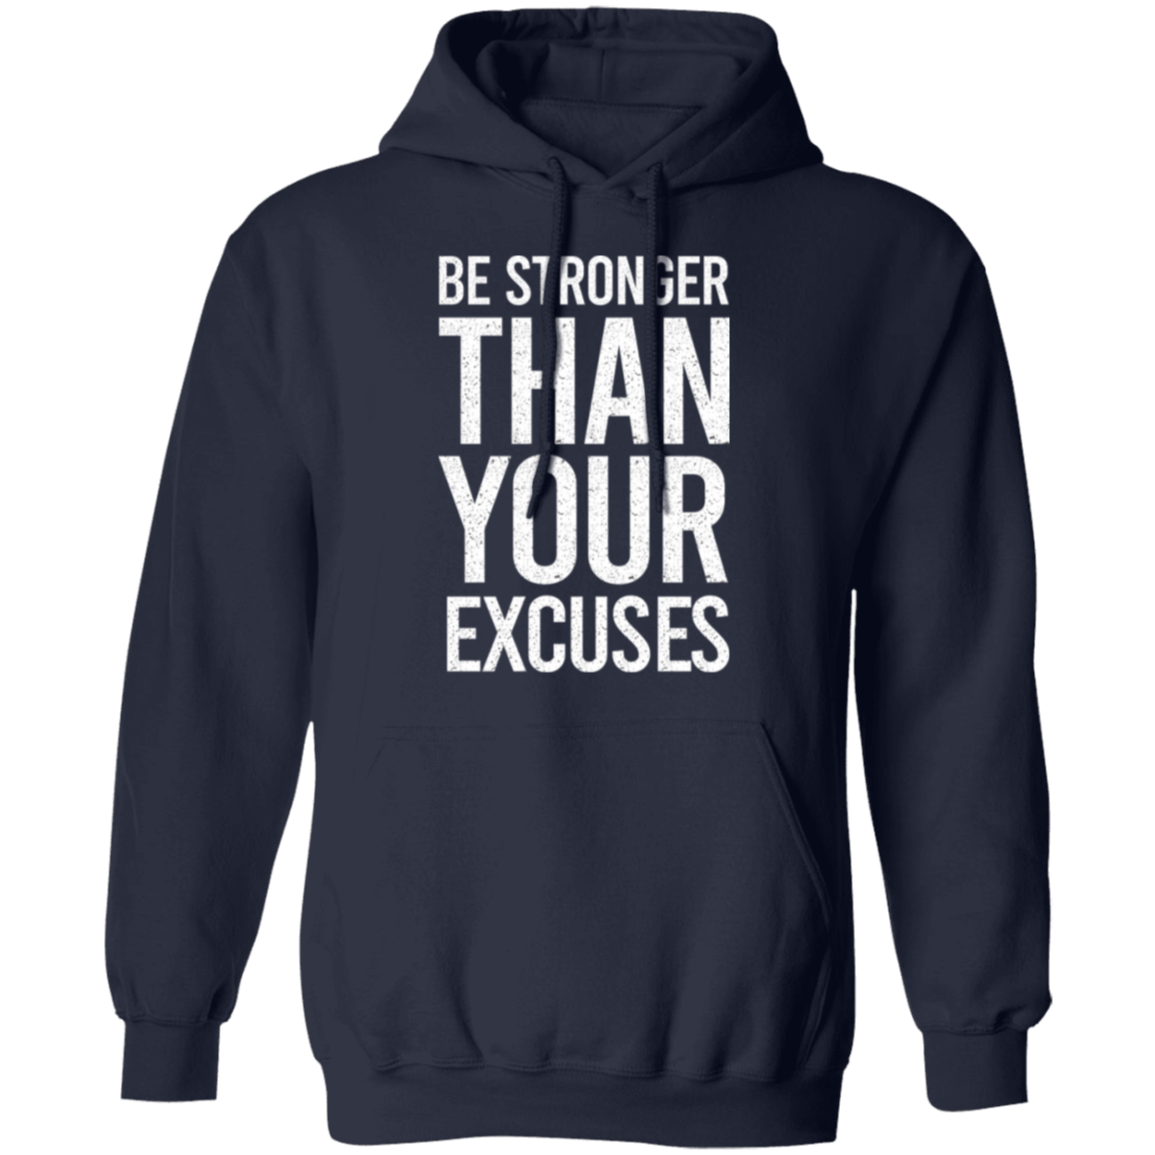 Be Stronger than your Excuses Premium Unisex Hoodies - Game Day Getup